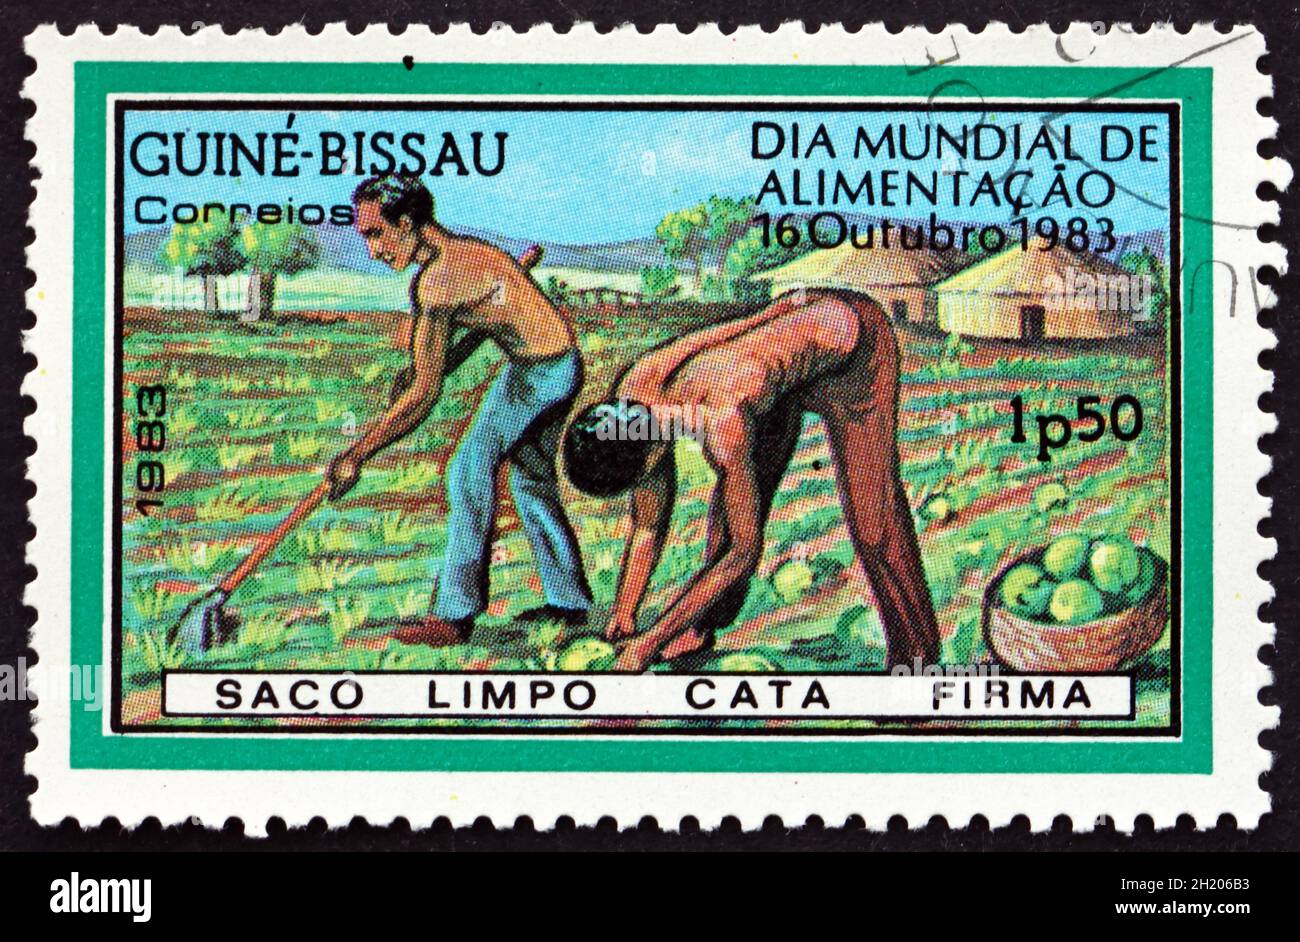 GUINEA-BISSAU - CIRCA 1983: a stamp printed in Guinea-Bissau dedicated to the World Food Day, People Working in the Field, circa 1983 Stock Photo